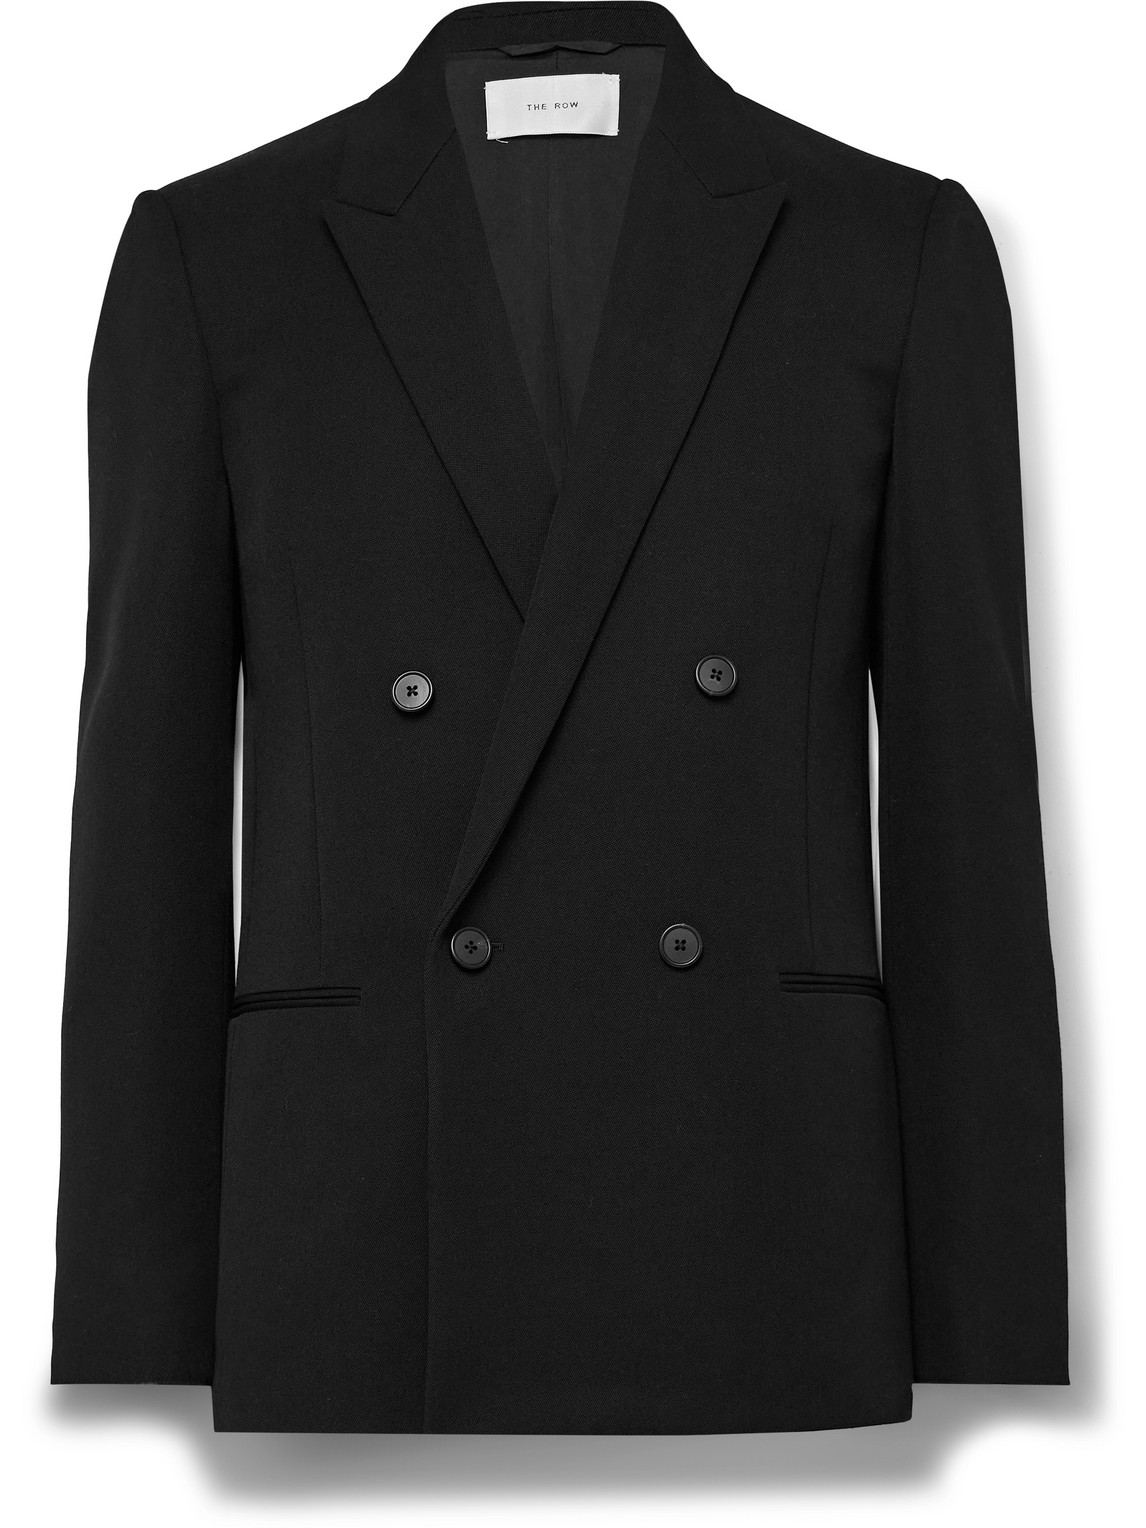 The Row - Wilson Double-Breasted Wool Suit Jacket - Men - Black - UK/US 36 von The Row